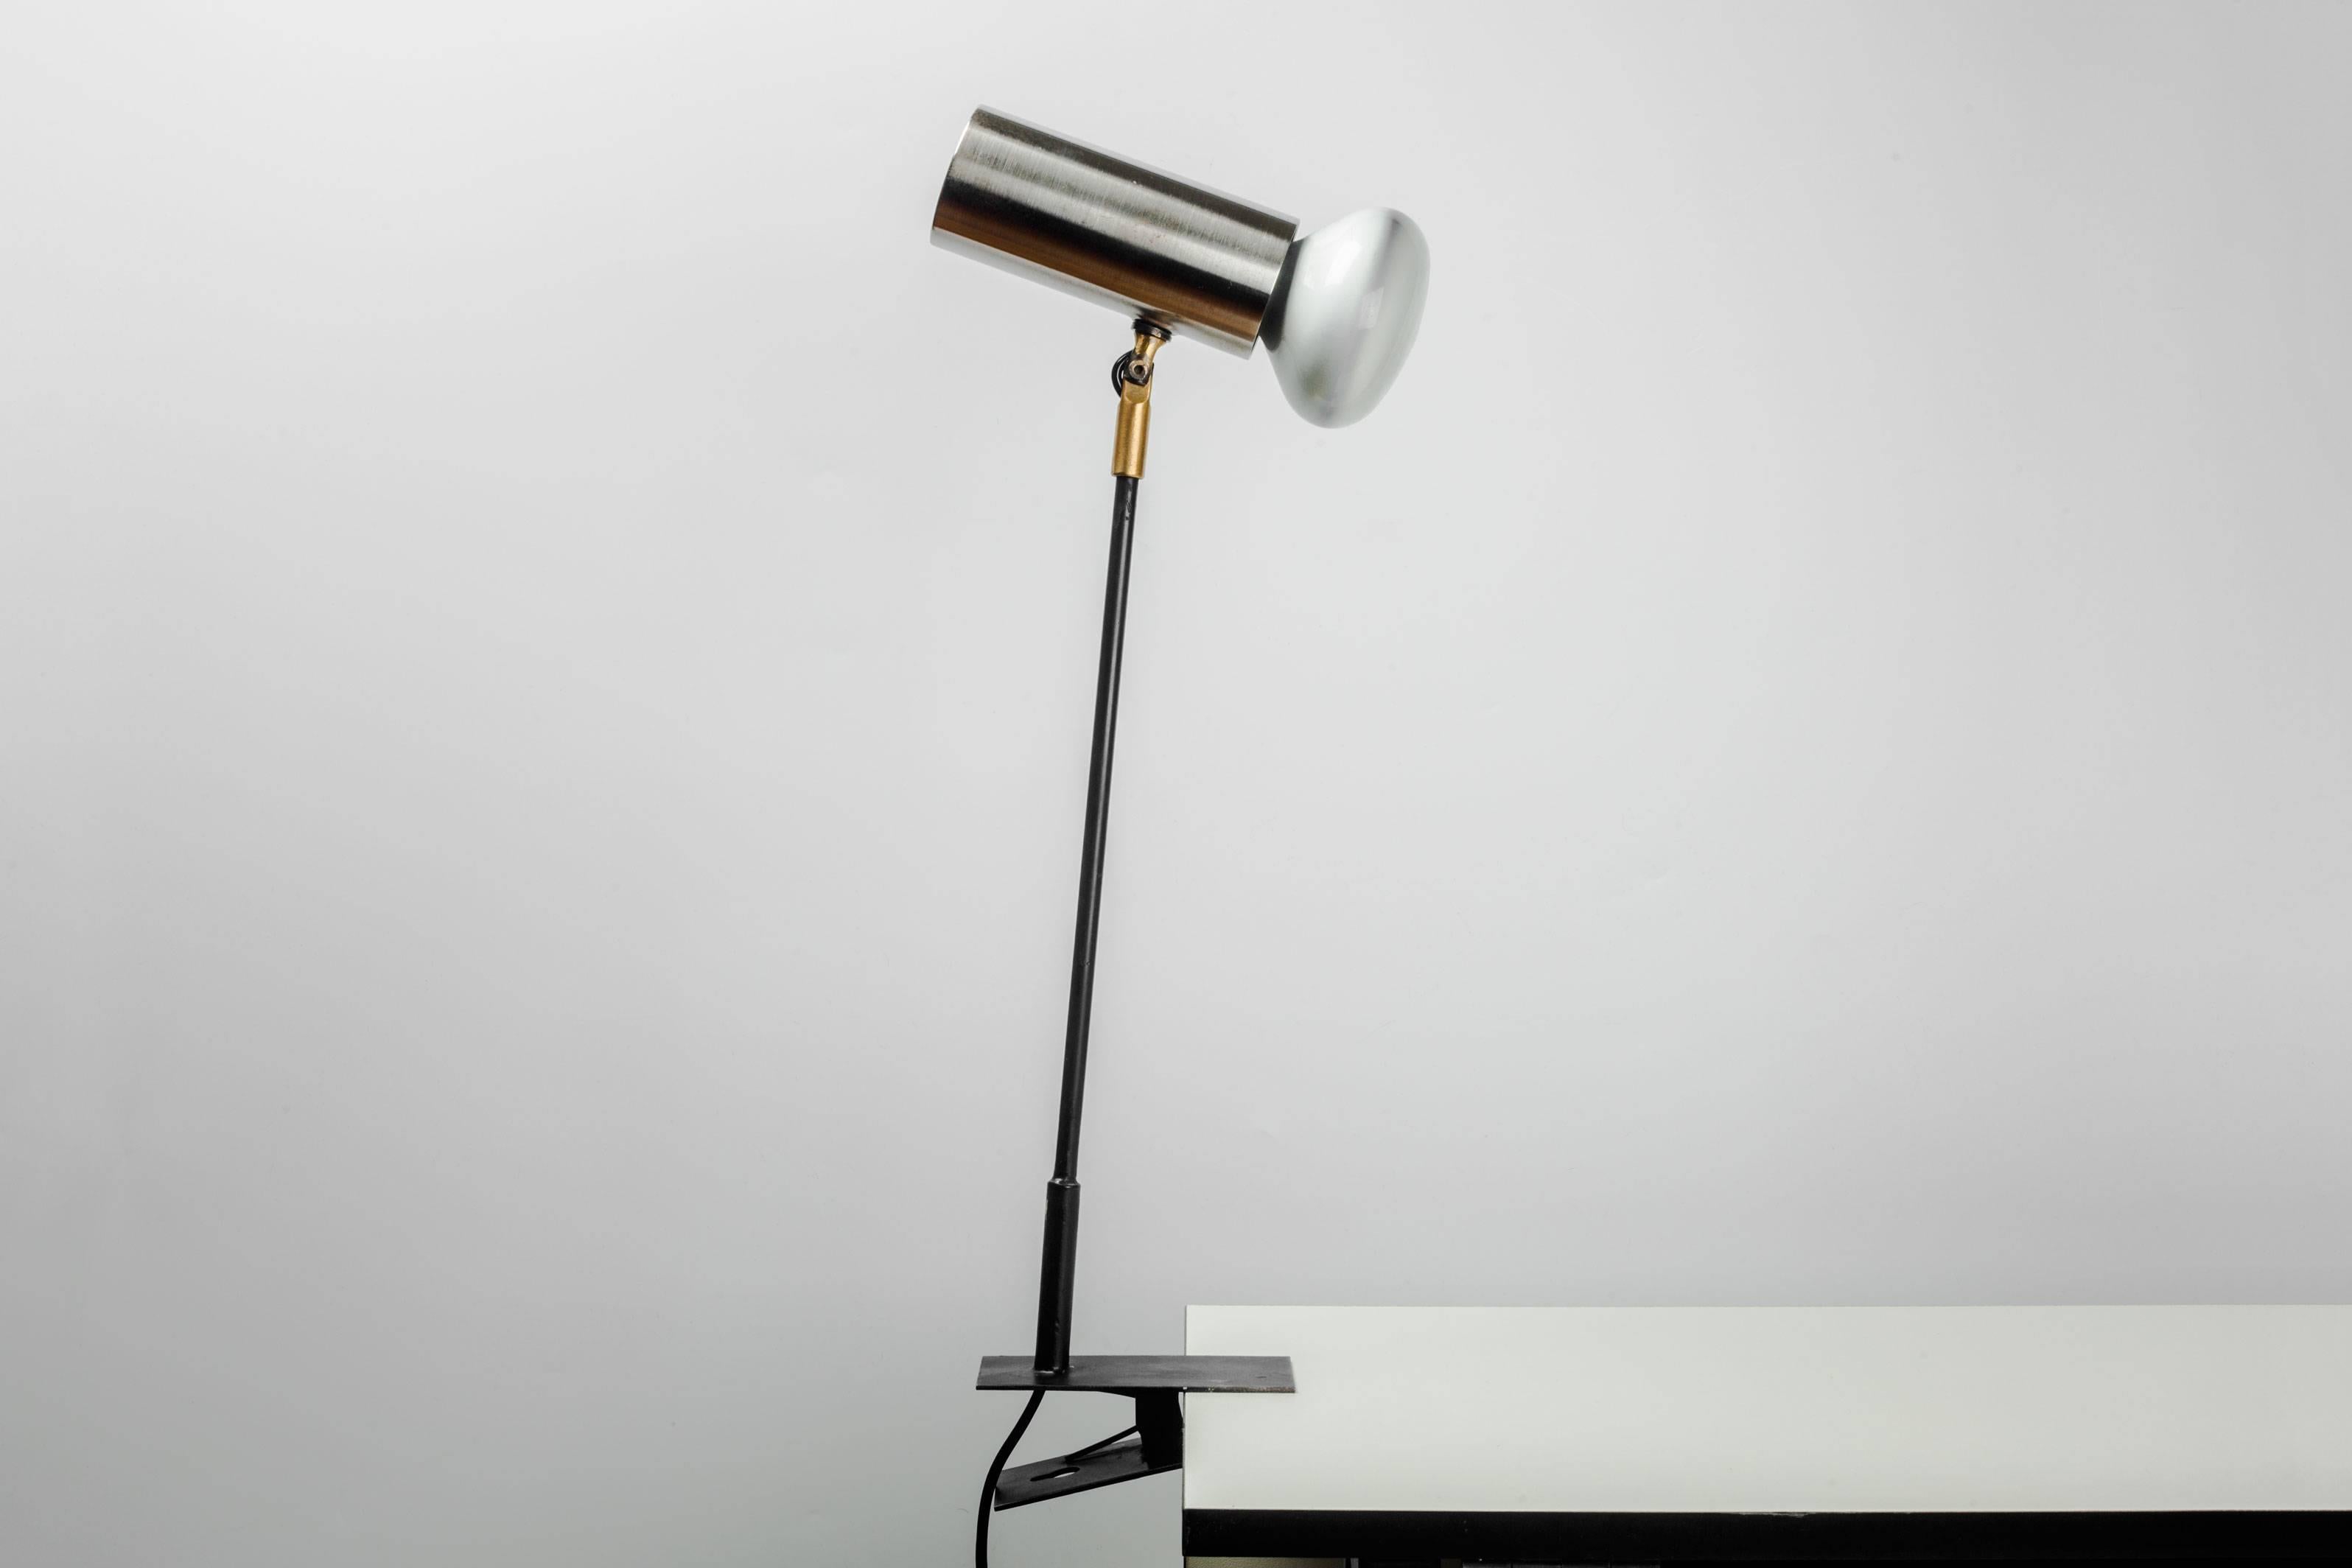 Bauhaus French Desk Lamp in Brushed Aluminum with Clamp, 1950s